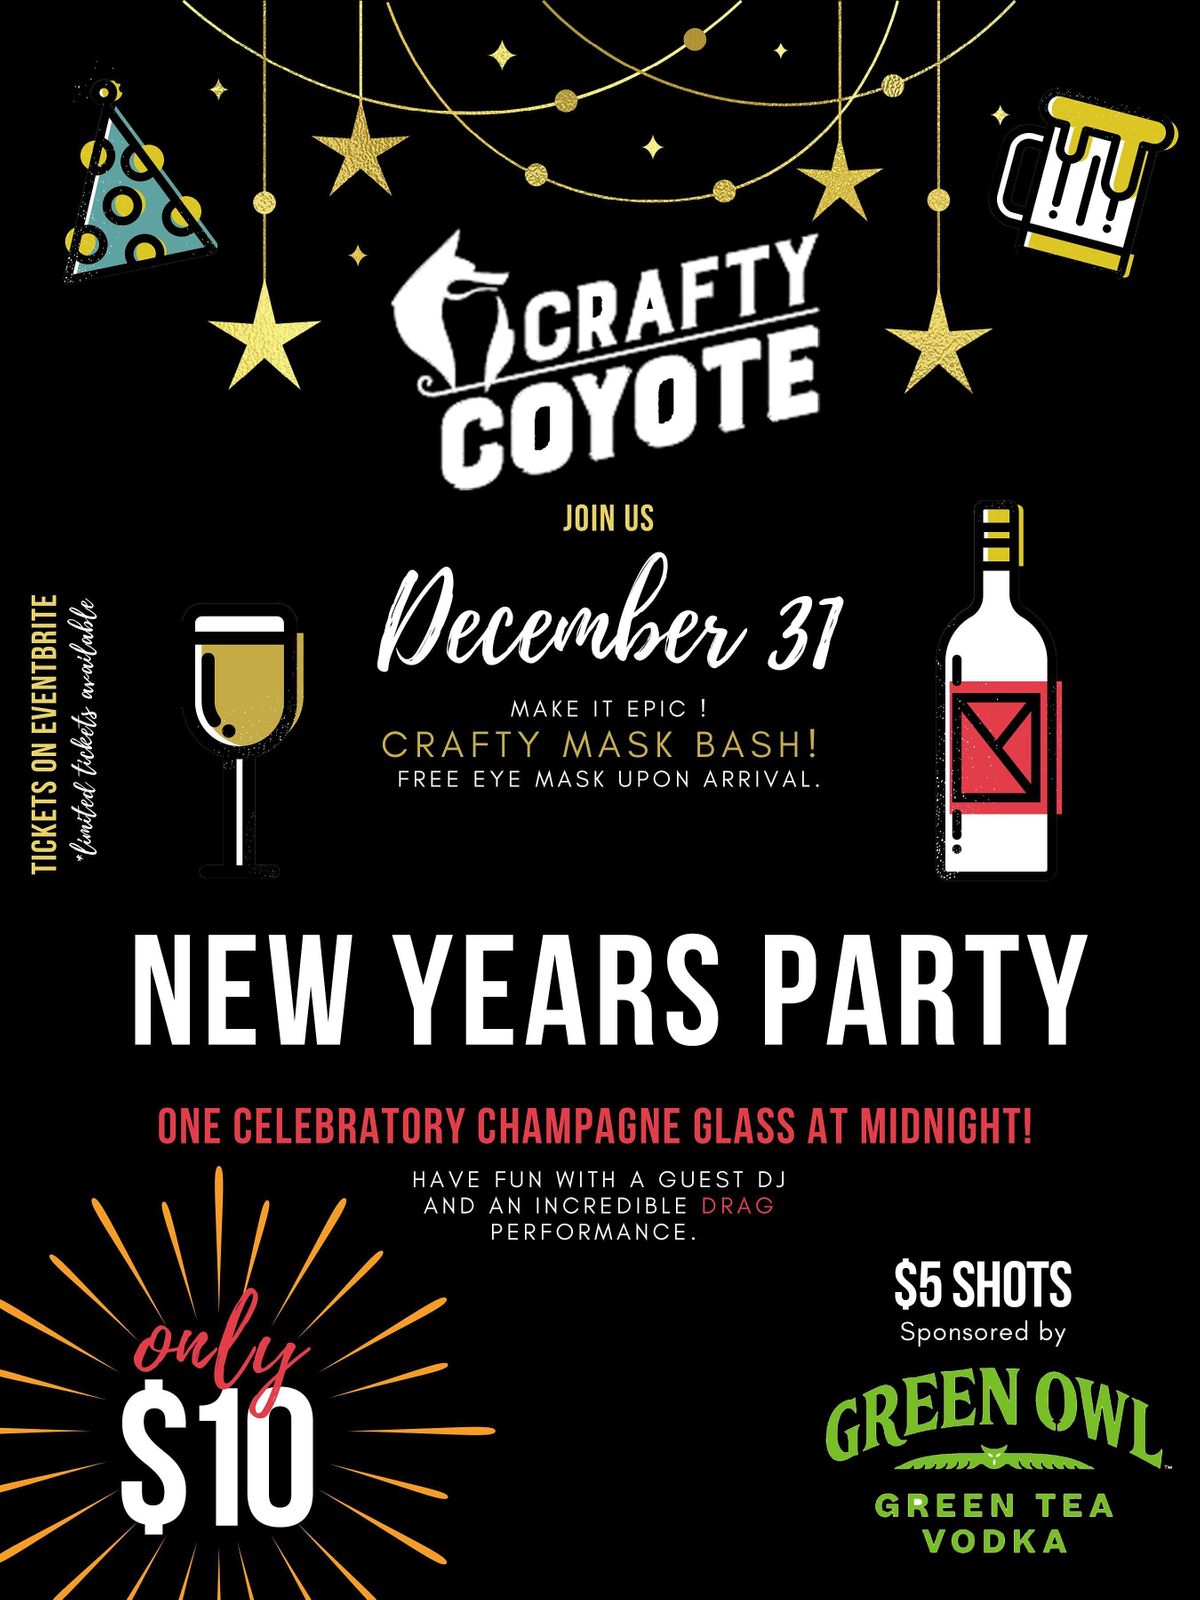 CRAFTY COYOTE NEW YEARS EVE PARTY!